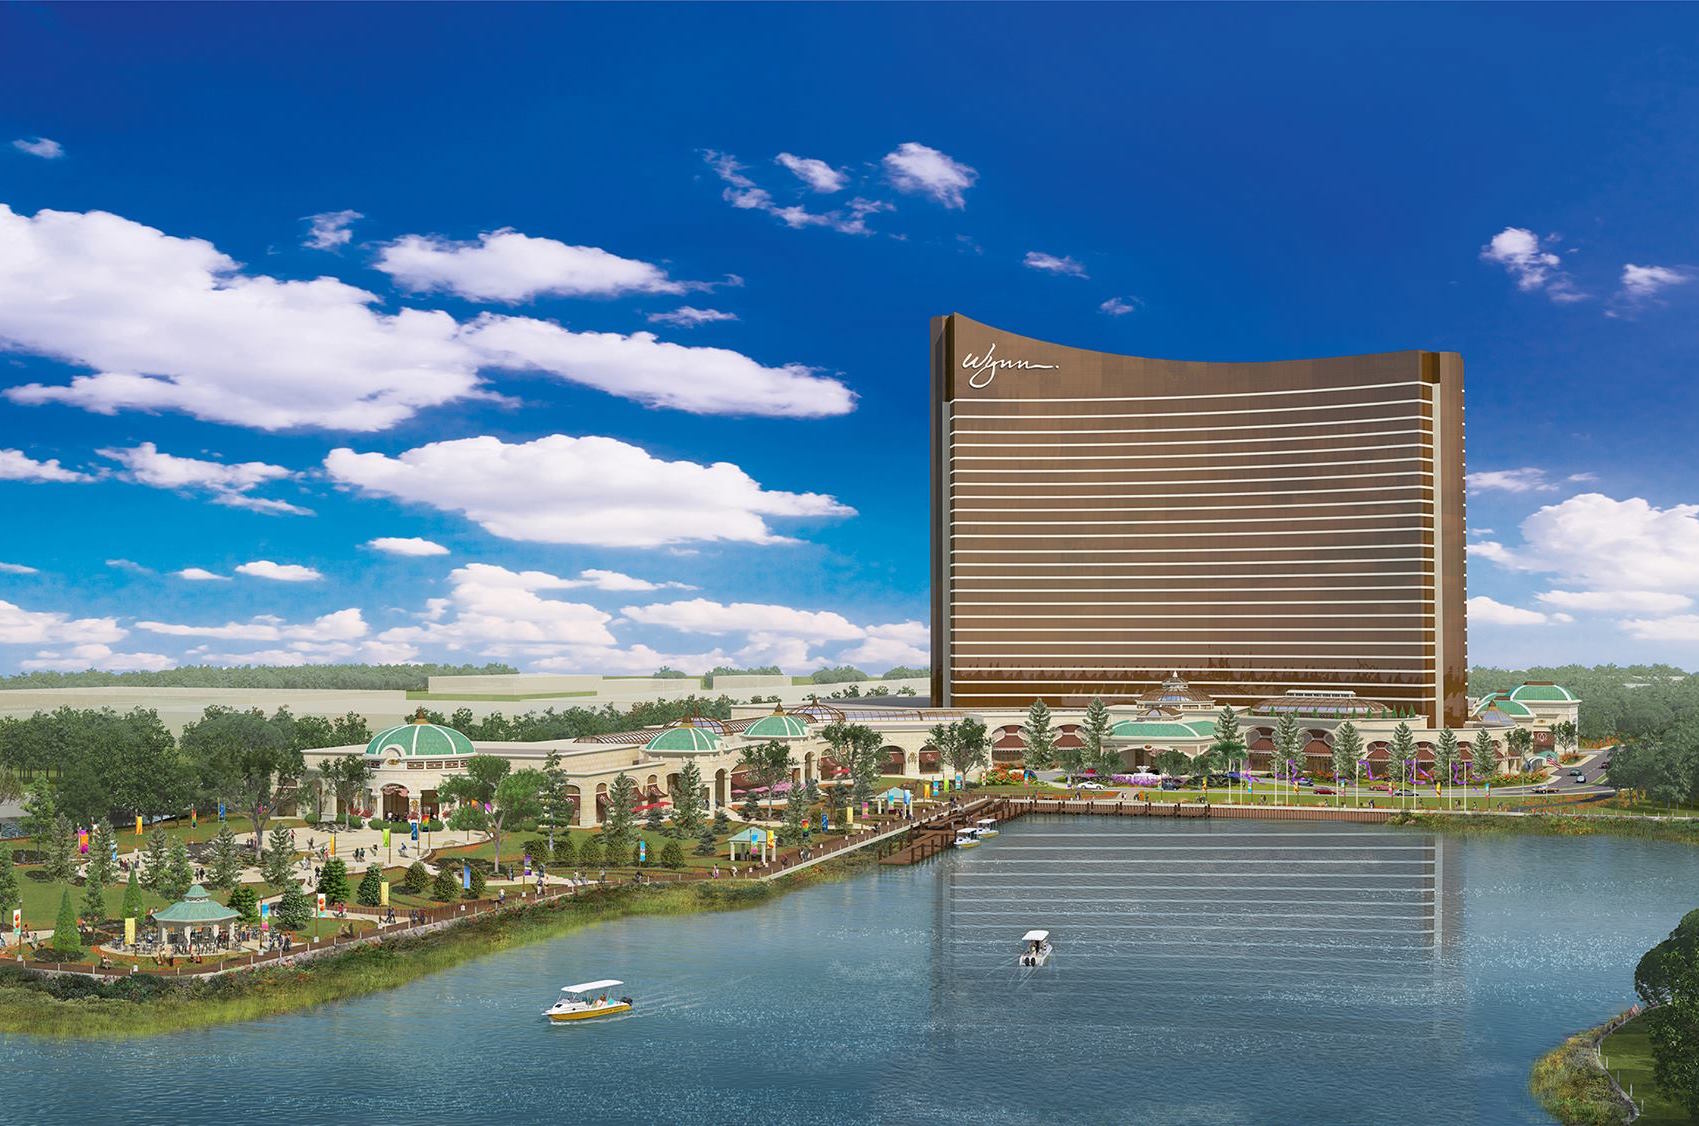 Non-Indian firm that beat out Mohegan Tribe puts casino on hold